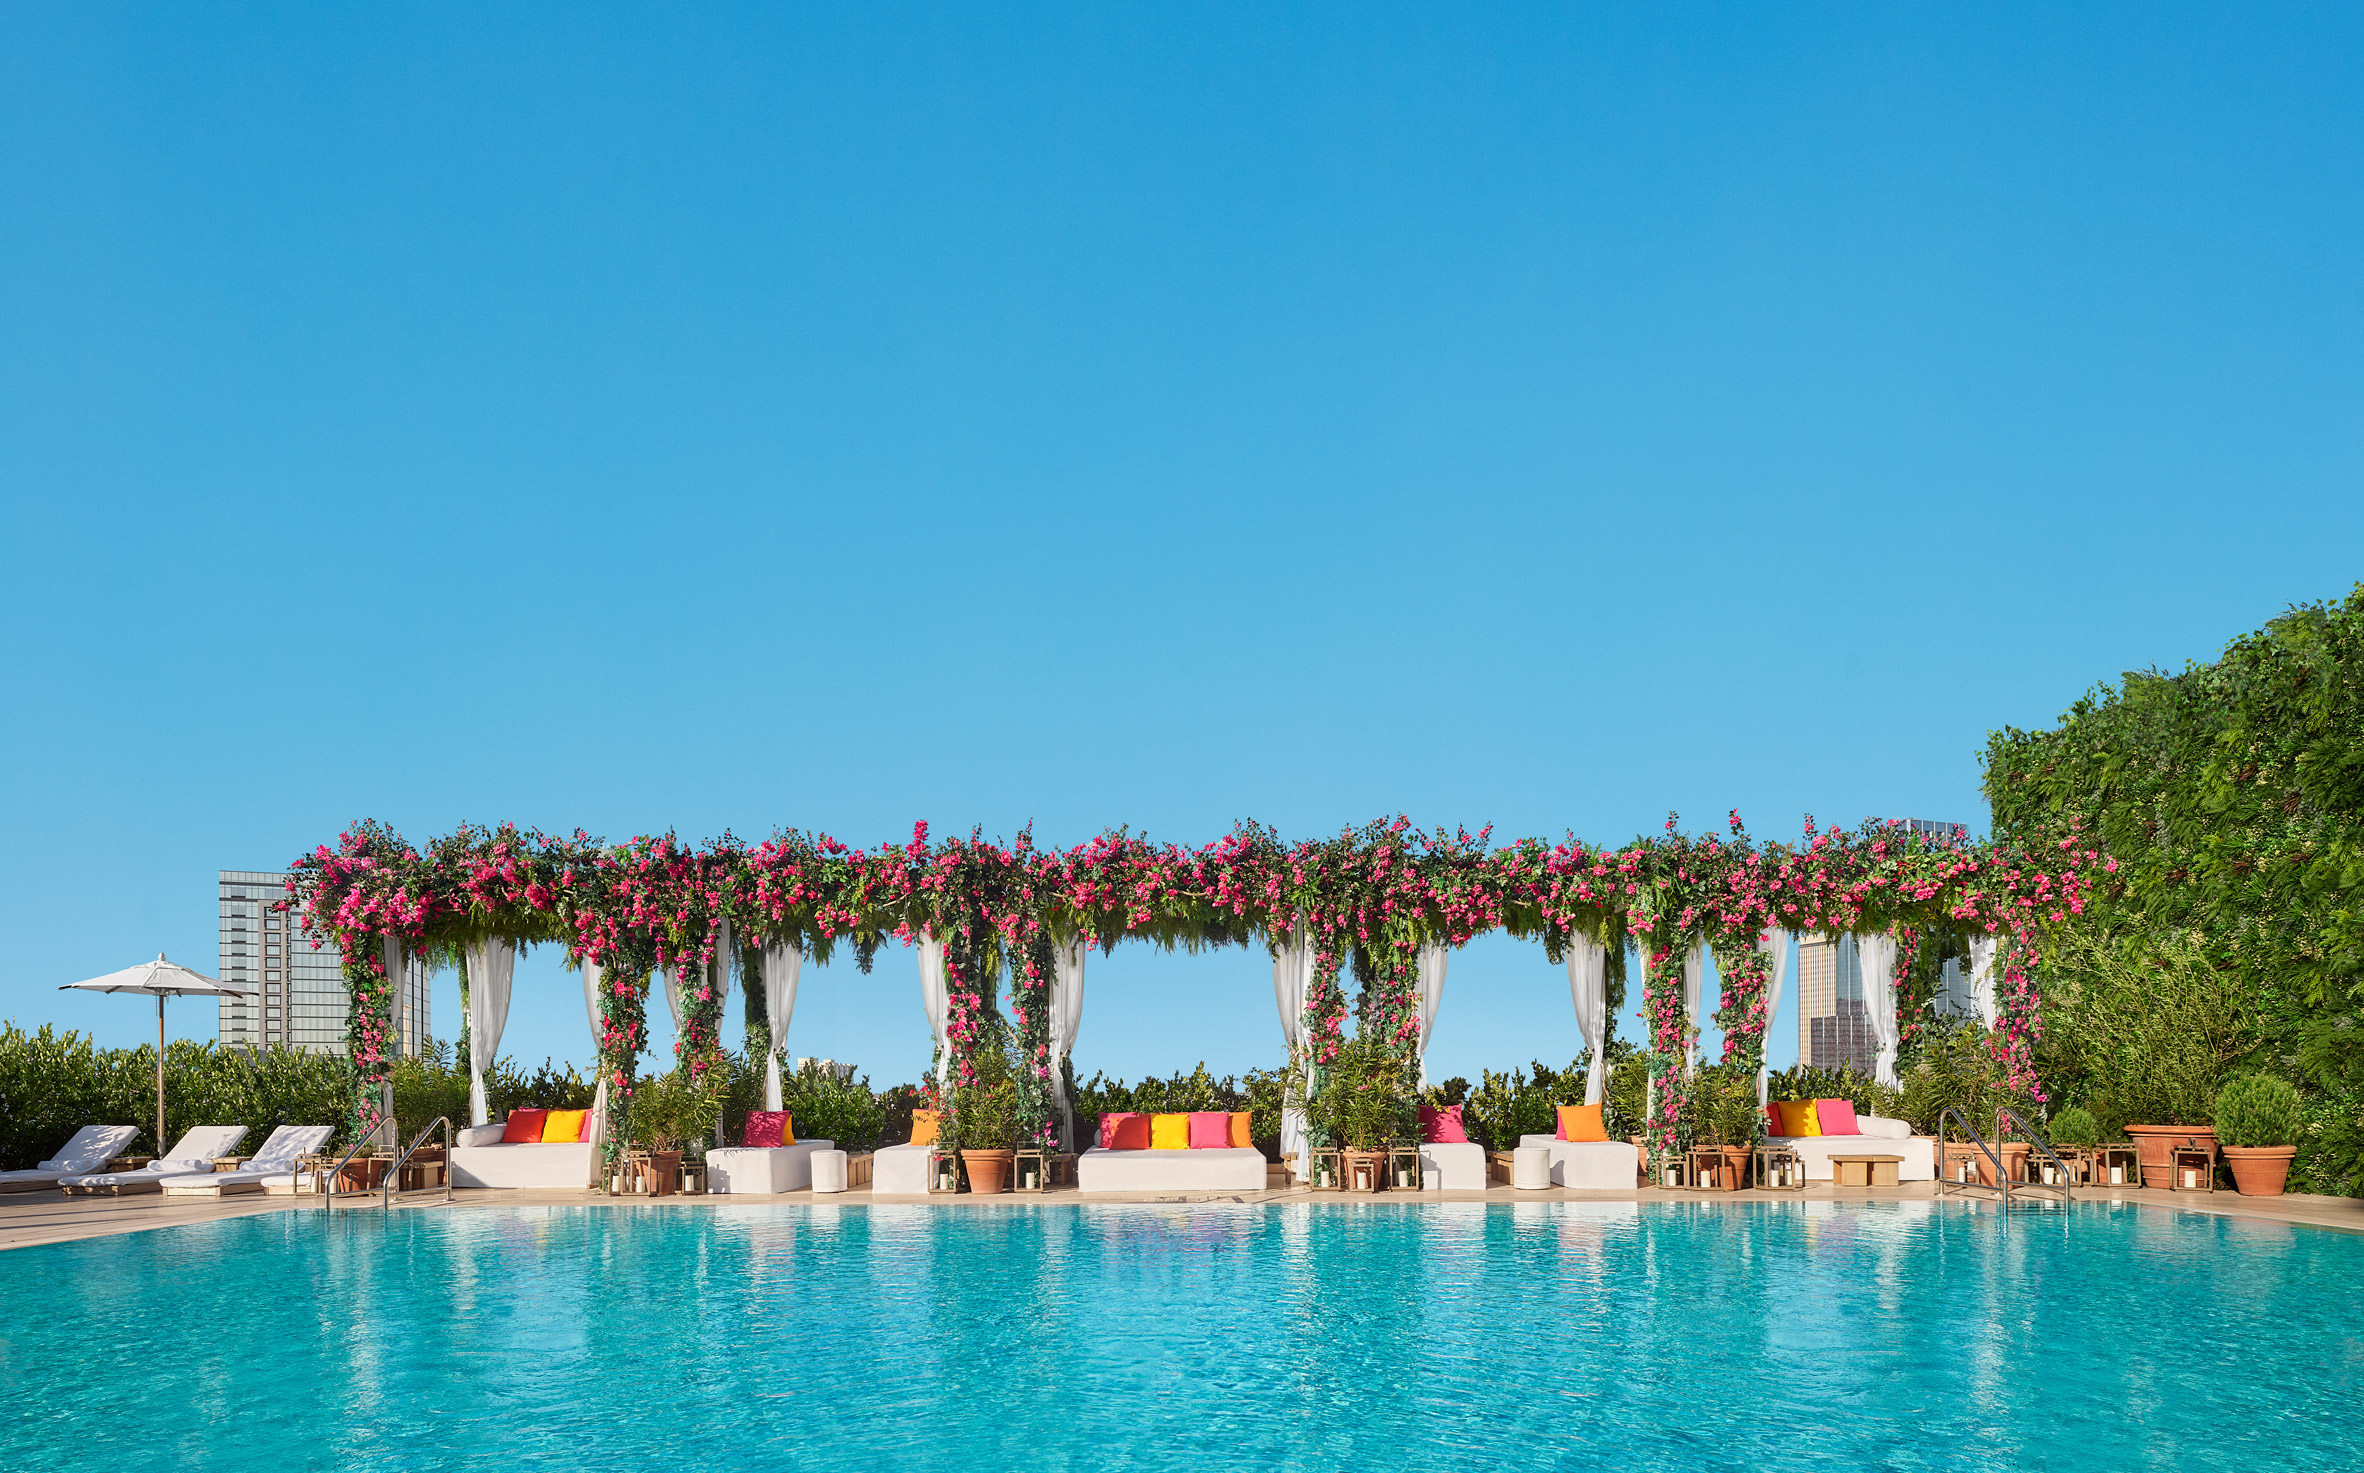 Pool terrace with flower-covered cabanas